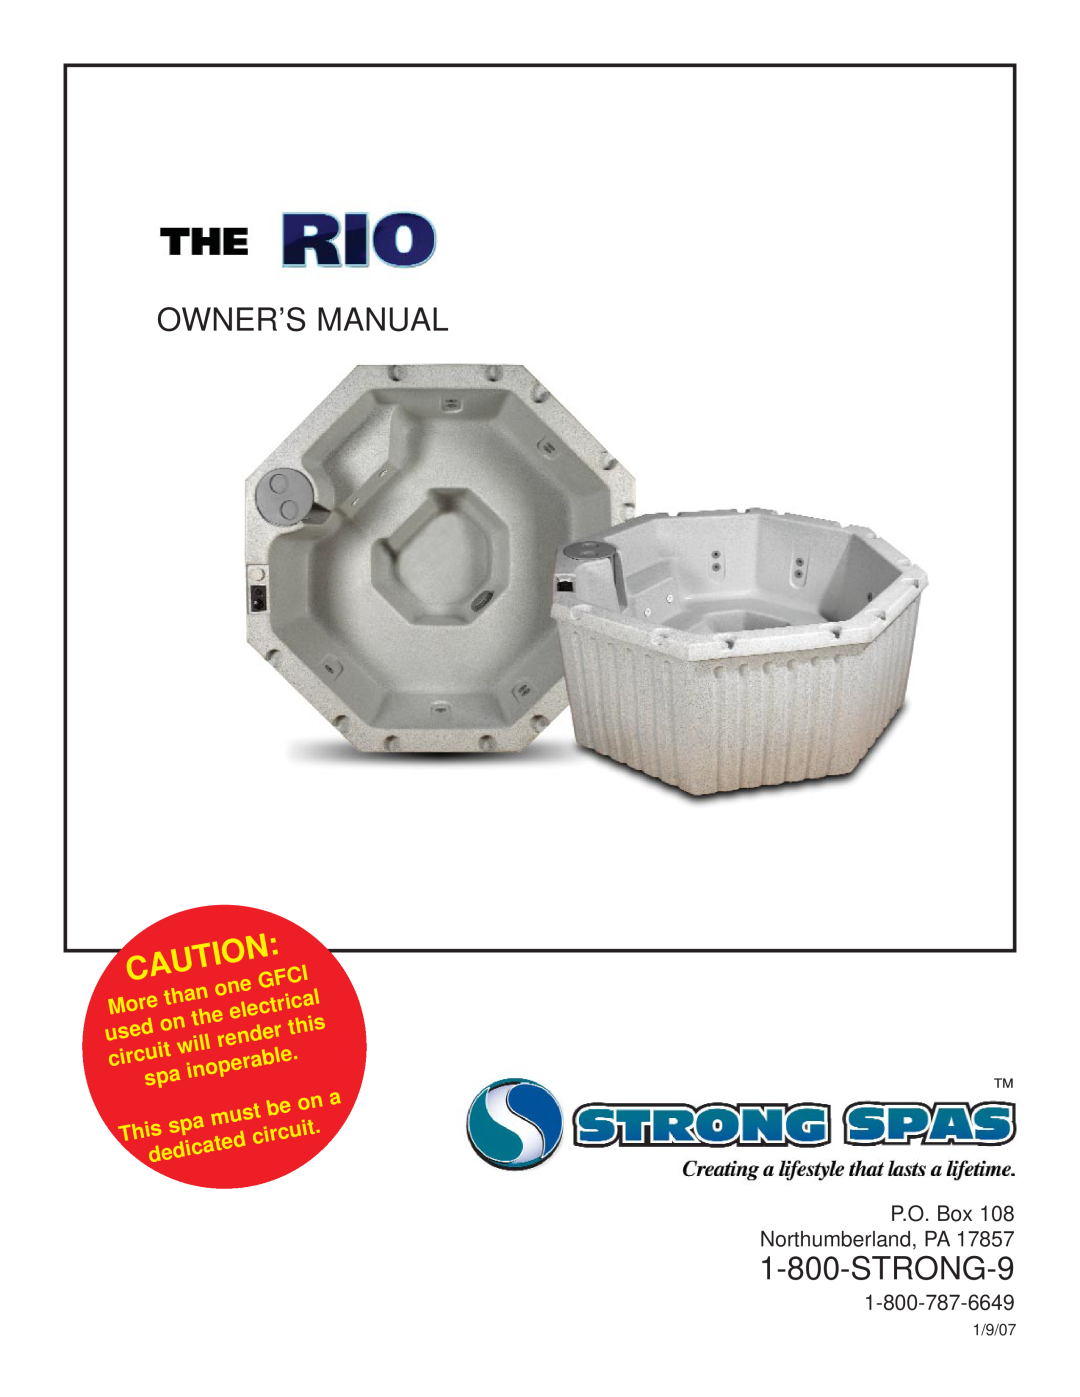 Strong Pools and Spas Rotational Molded resin whirlpool spa owner manual STRONG-9, than, Gfci, More, electrical, used 